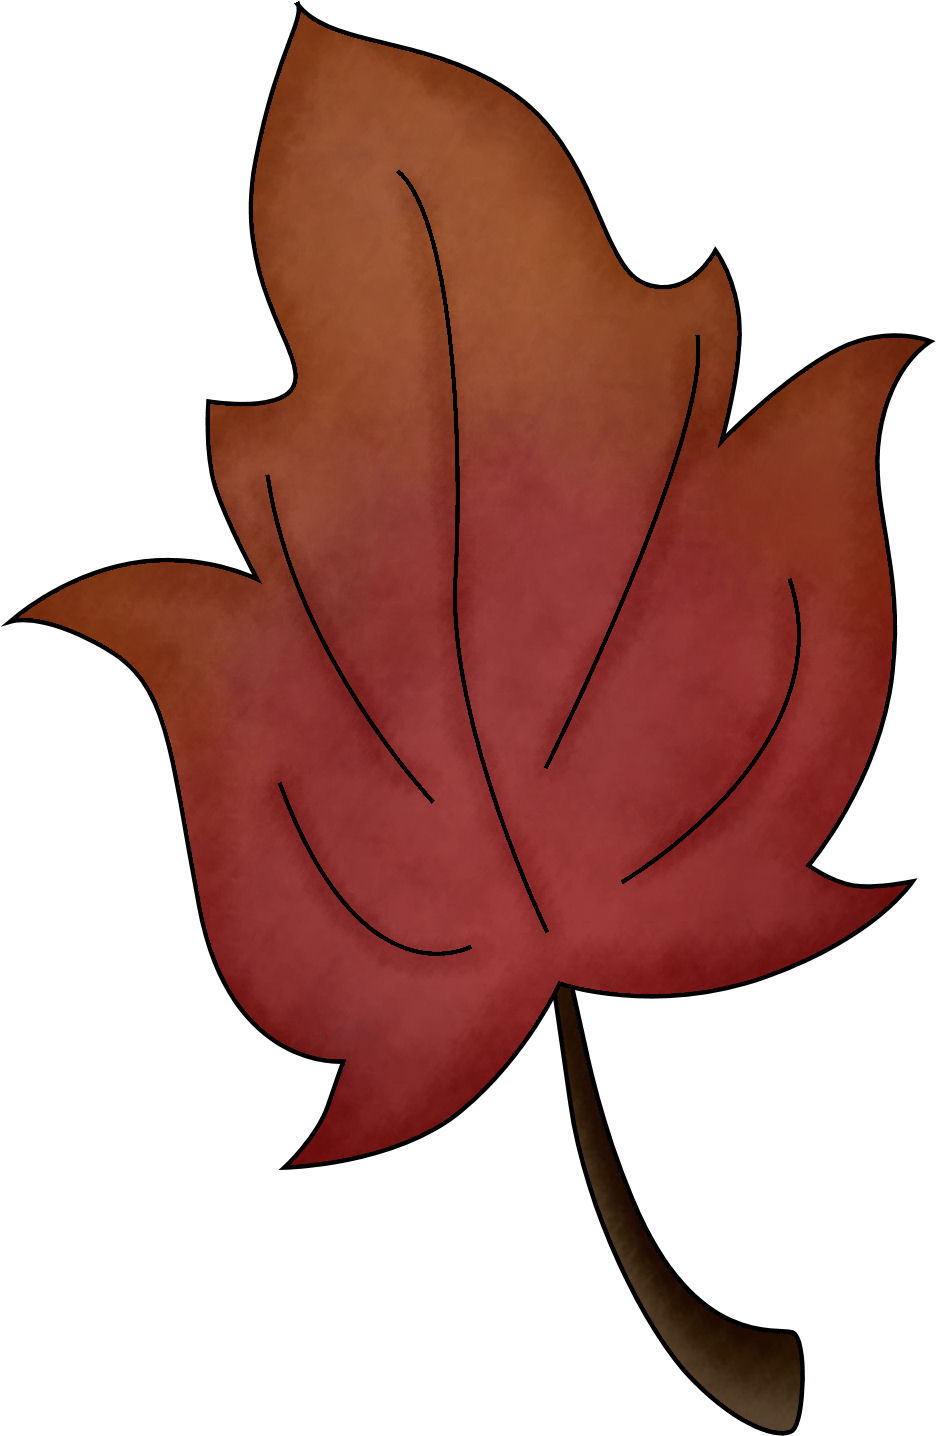 Fall Leaf Clipart No Background | Clipart Panda - Free Clipart Images